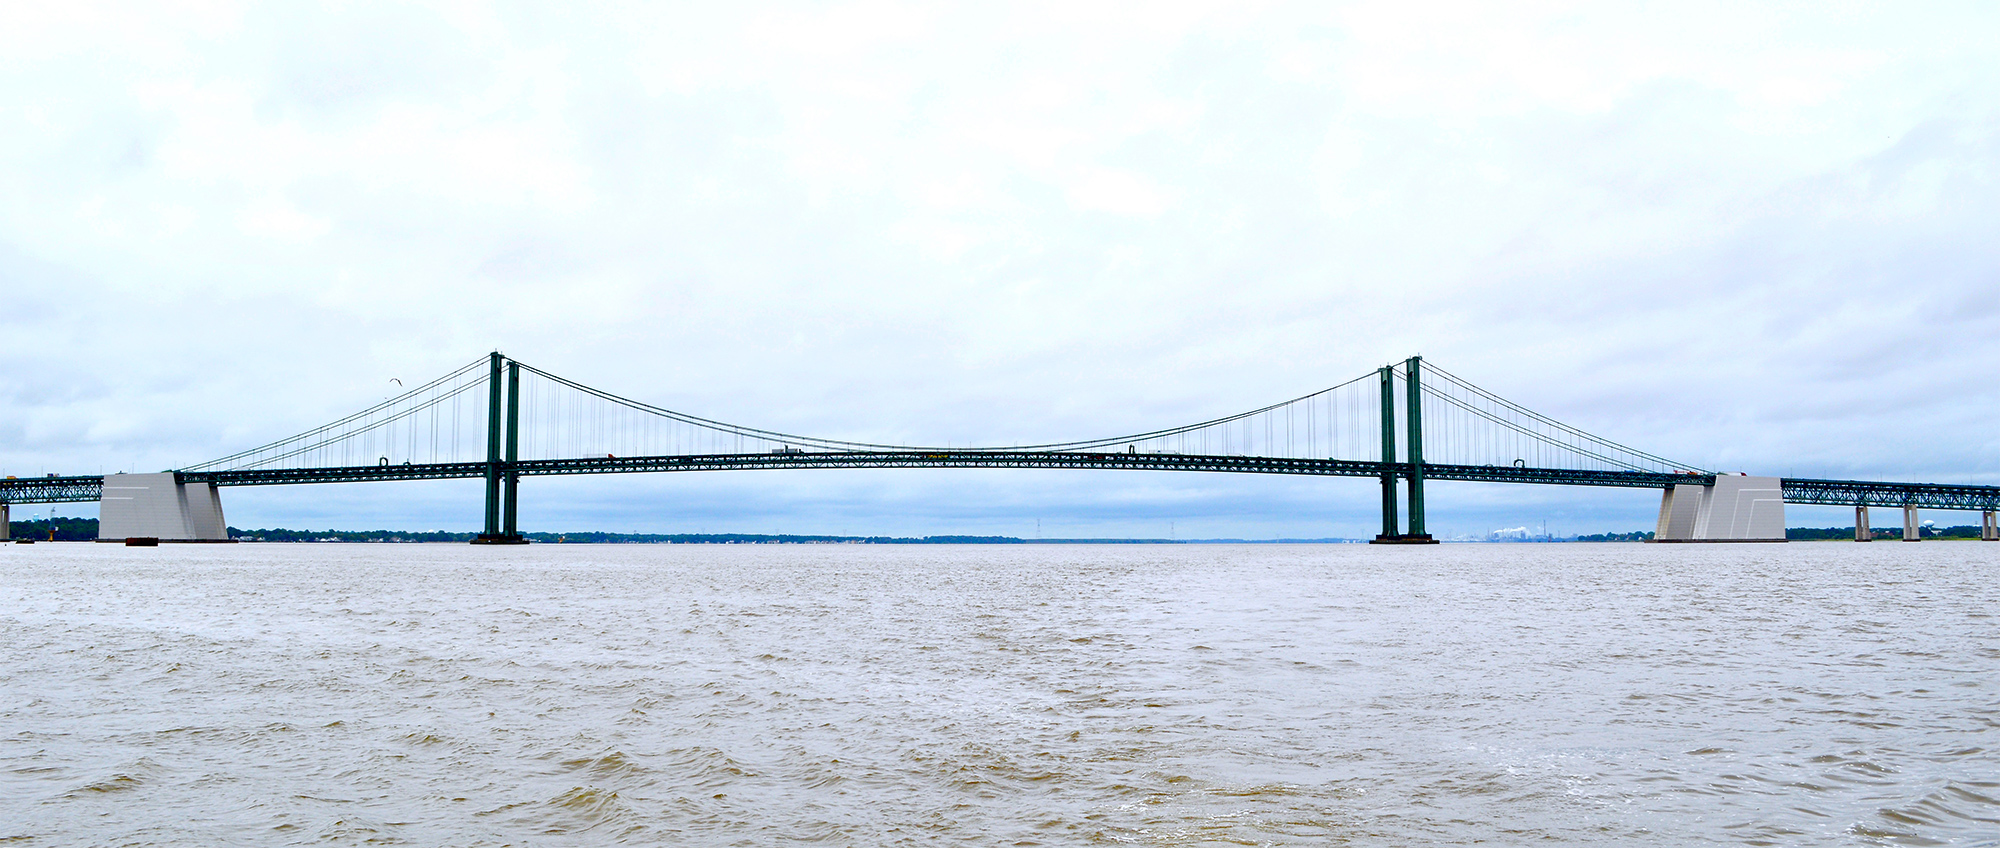 A long-distance view of a twin suspension bridge crossing the Delaware River. The sky is cloudy and the surface of the river is small, choppy waves.